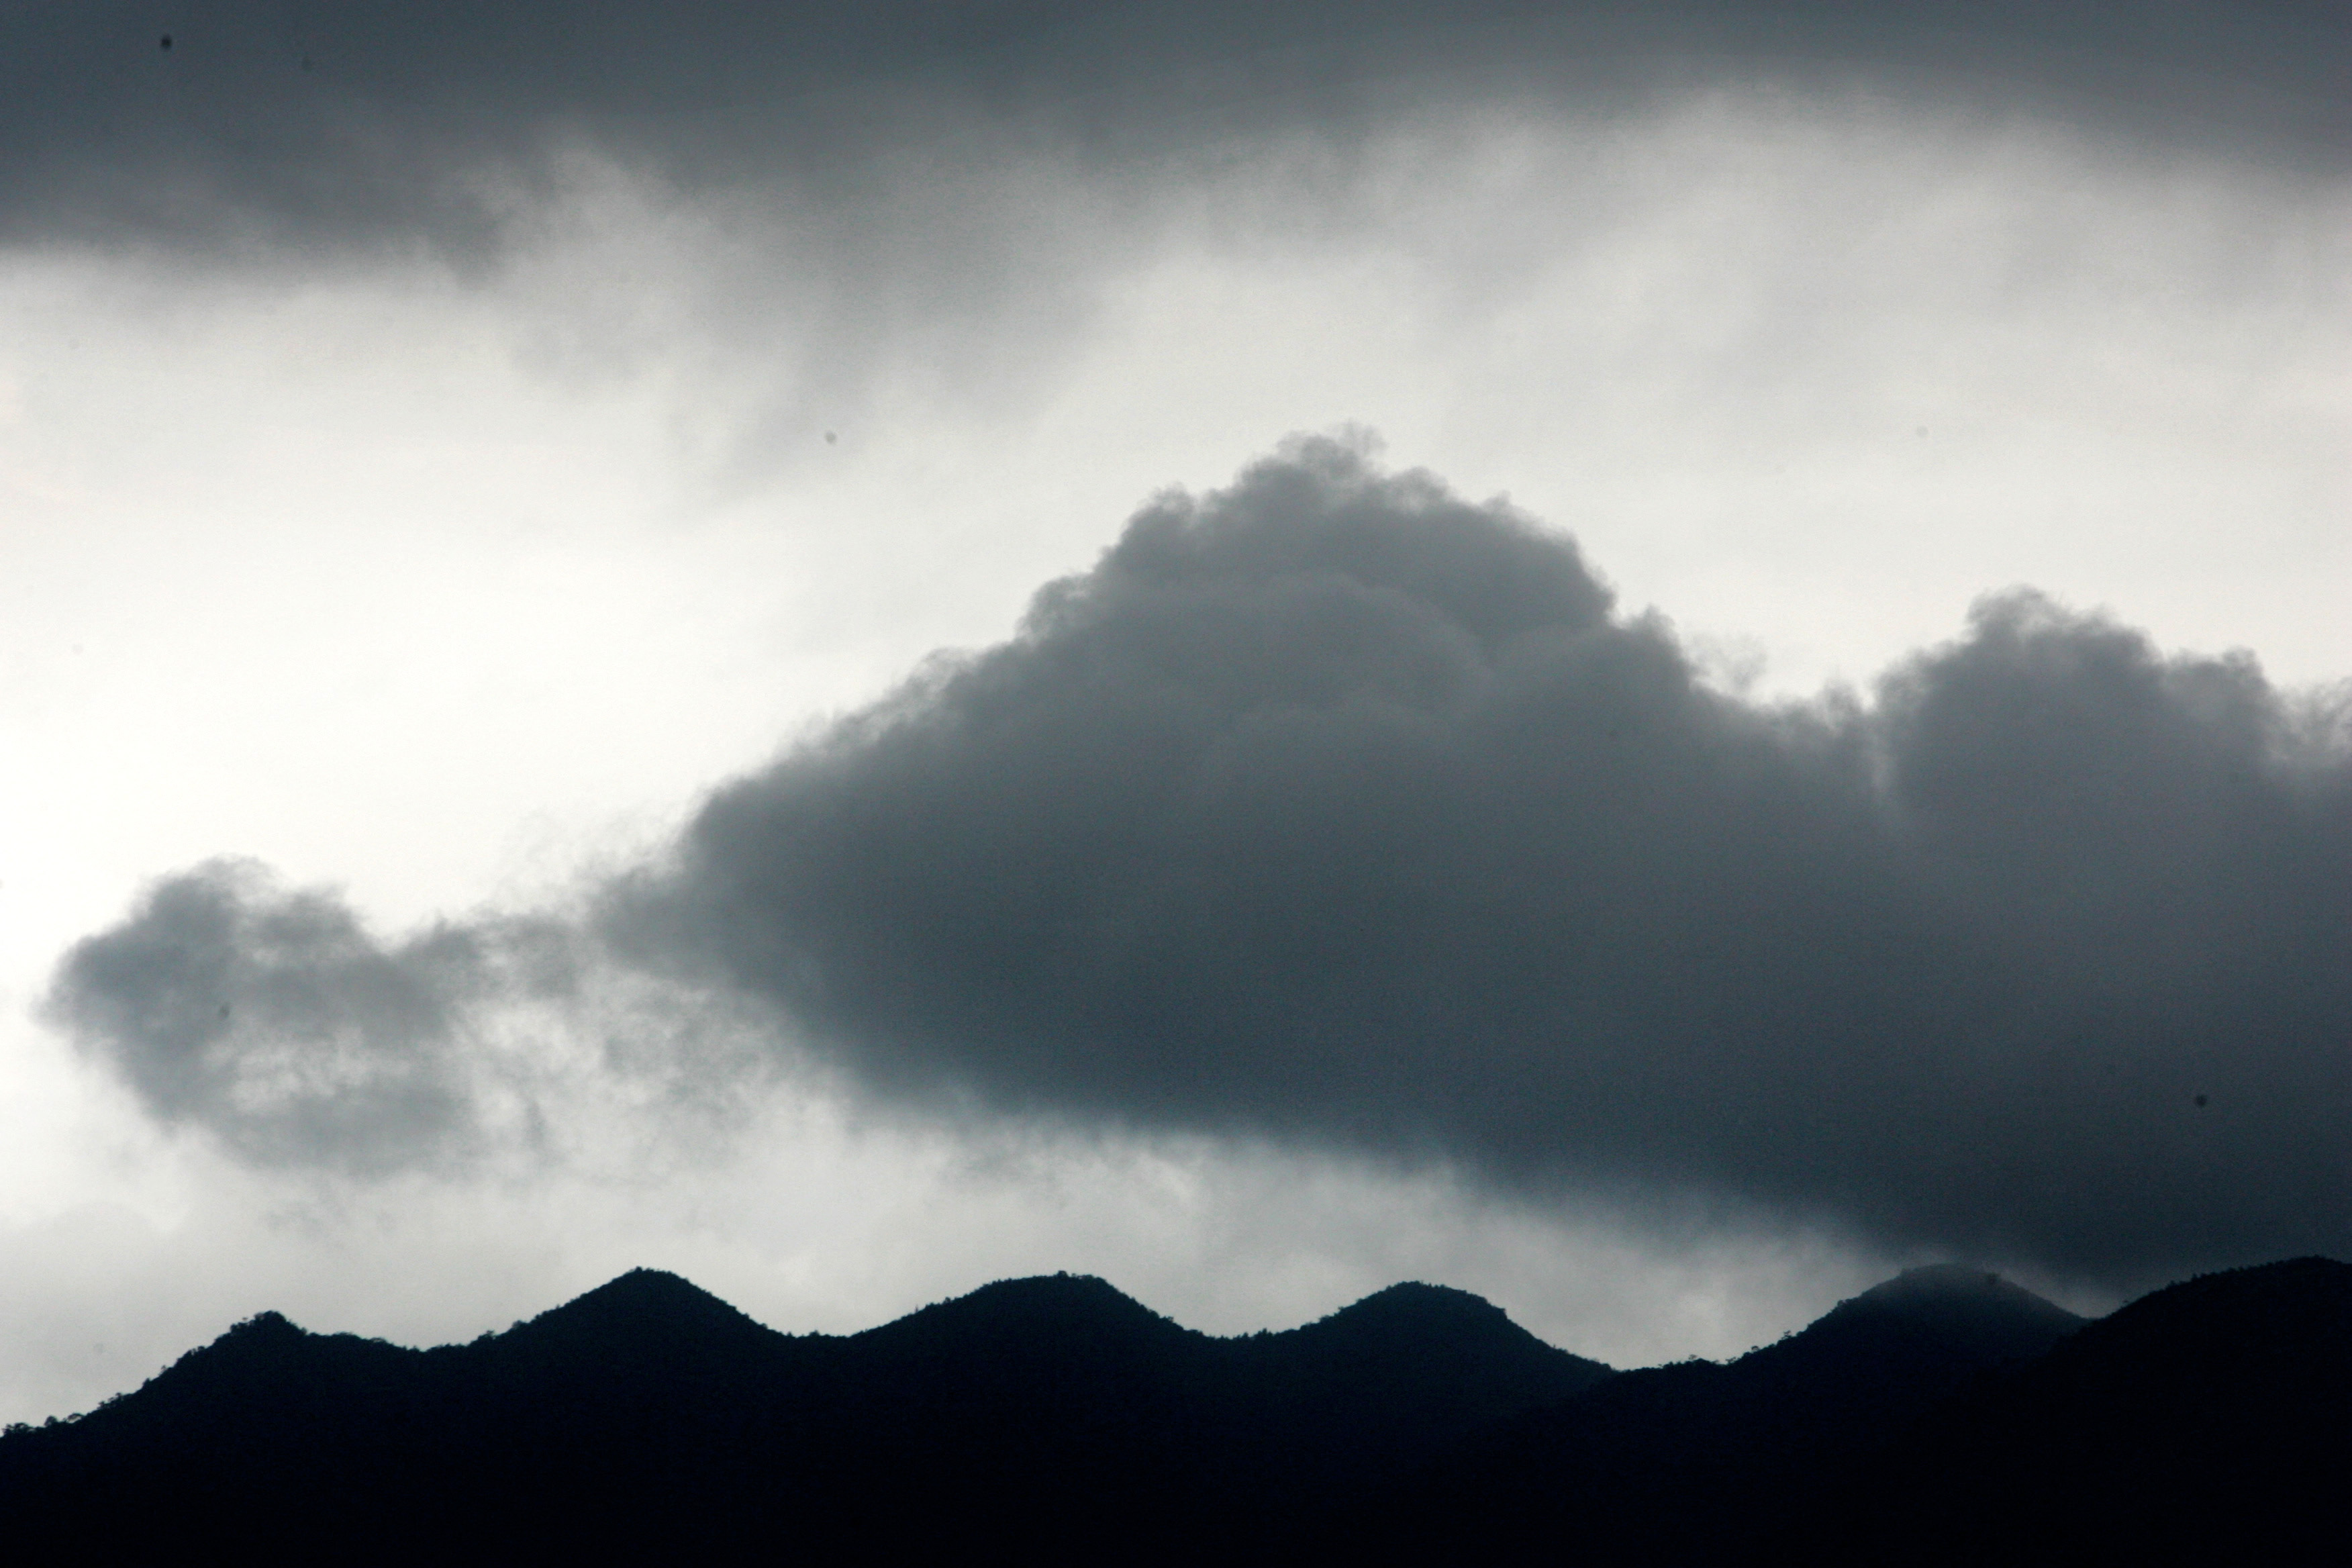 Dark clouds gather over mountains in Zhaoqing, southern China's Guangdong province.